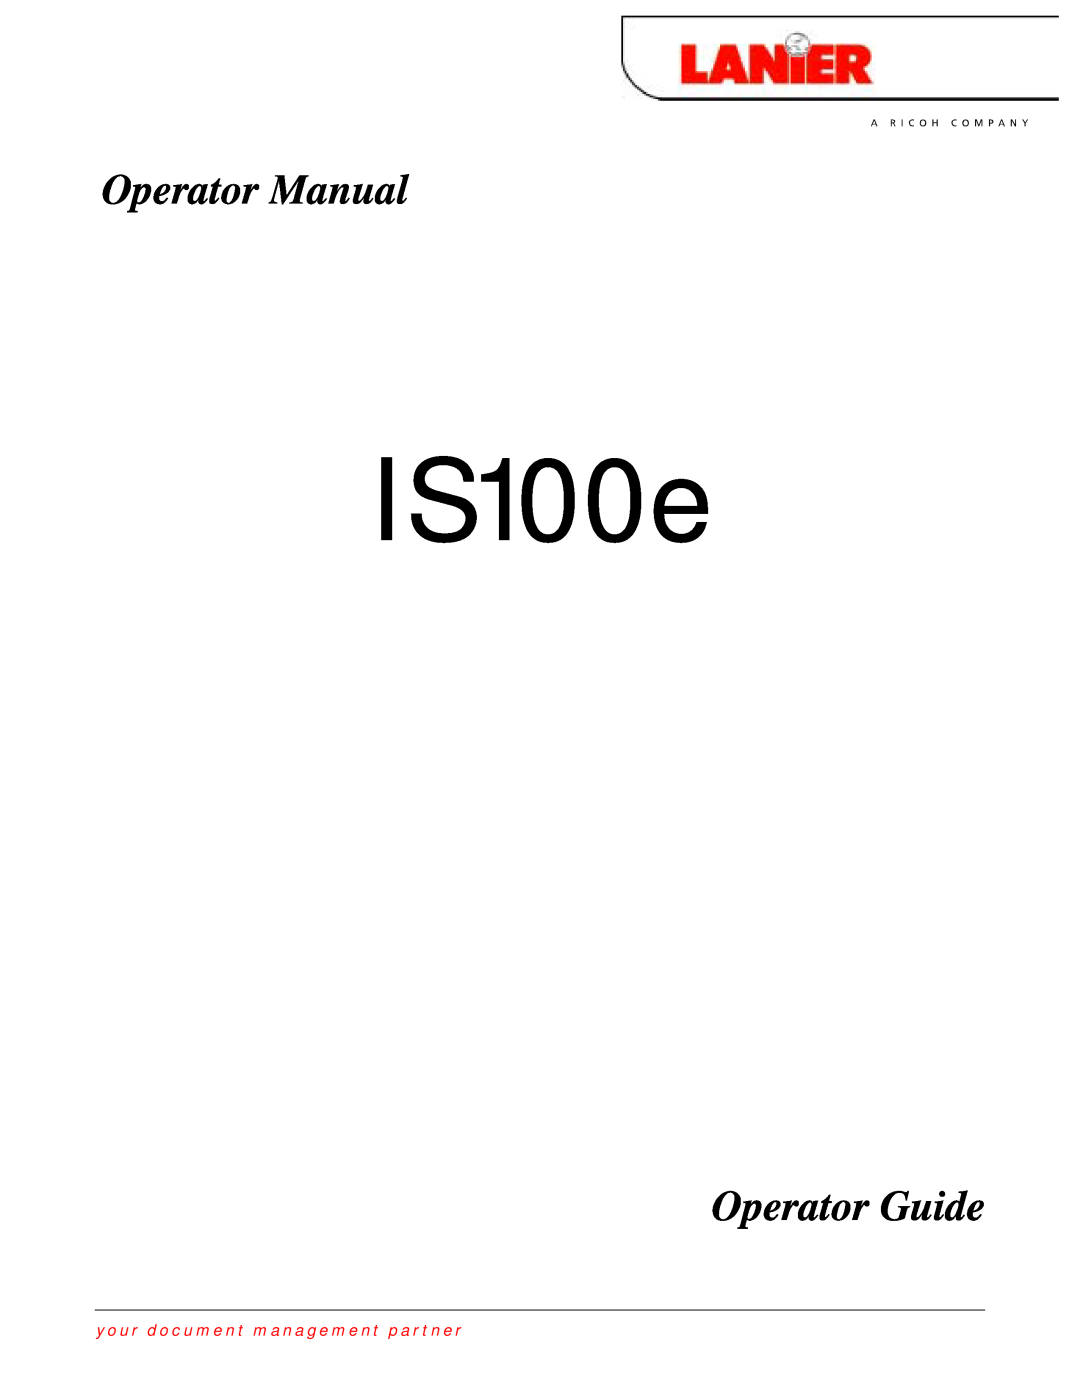 Lanier IS100e manual Operator Manual, Operator Guide, your document management partner 